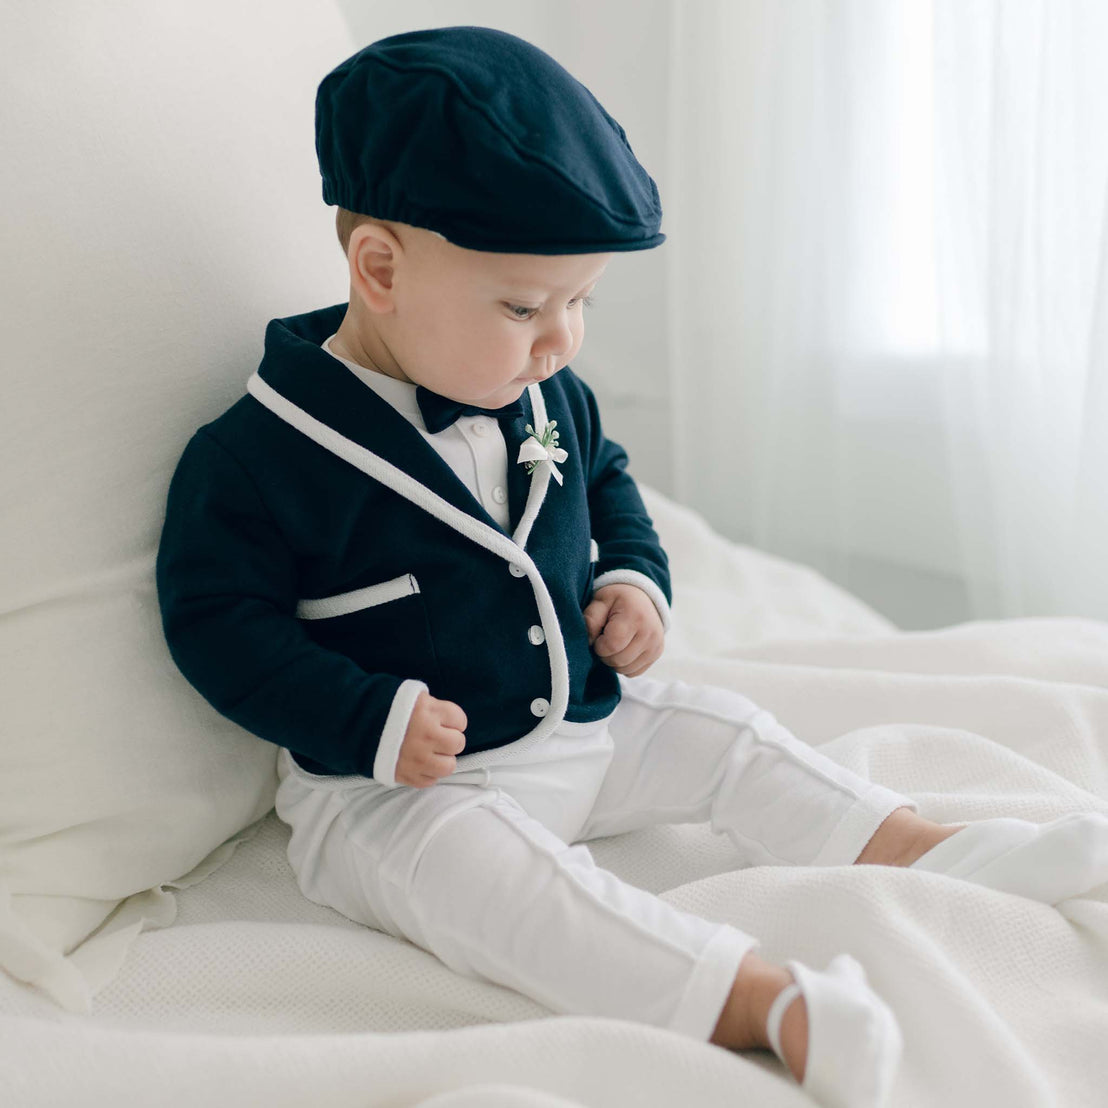 Baby boy sitting on a bed and wearing the Elliott 3-Piece Suit, including the jacket, pants, and onesie (and matching newsboy cap). He is also wearing the Elliott Bow Tie & Boutonniere.